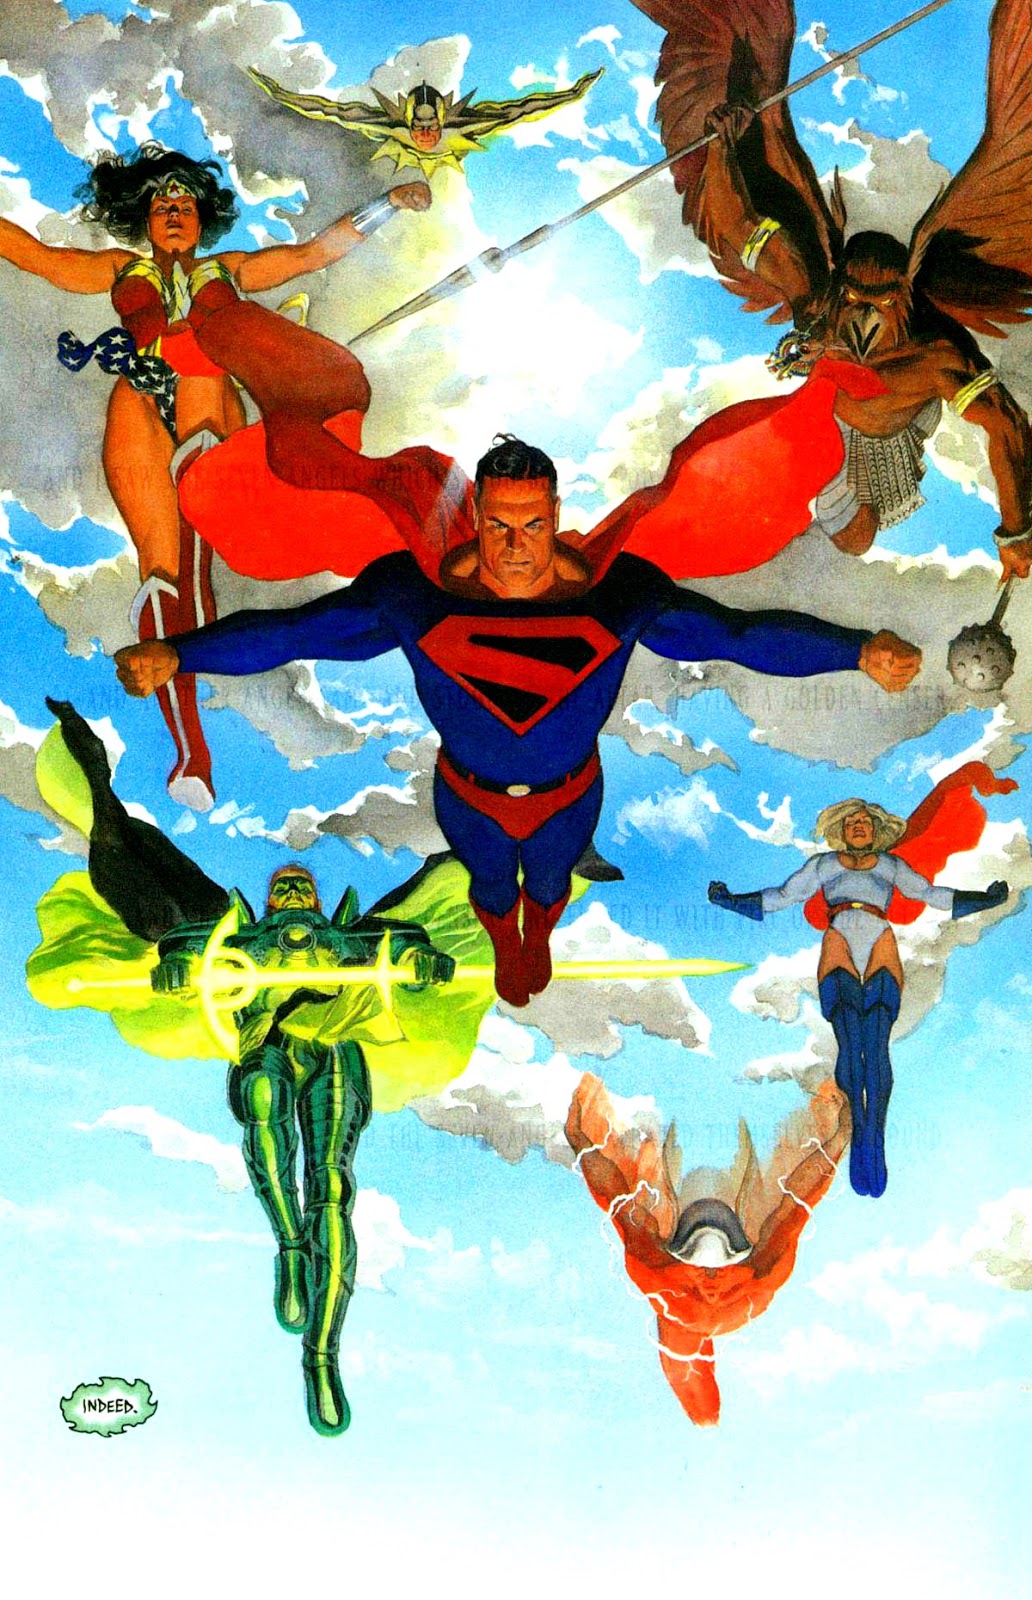 Word Balloon The Pop Culture Interview Podcast Ep 614 Word Balloon Podcast Kingdom Come th Anniversary Special Part 2 Alex Ross